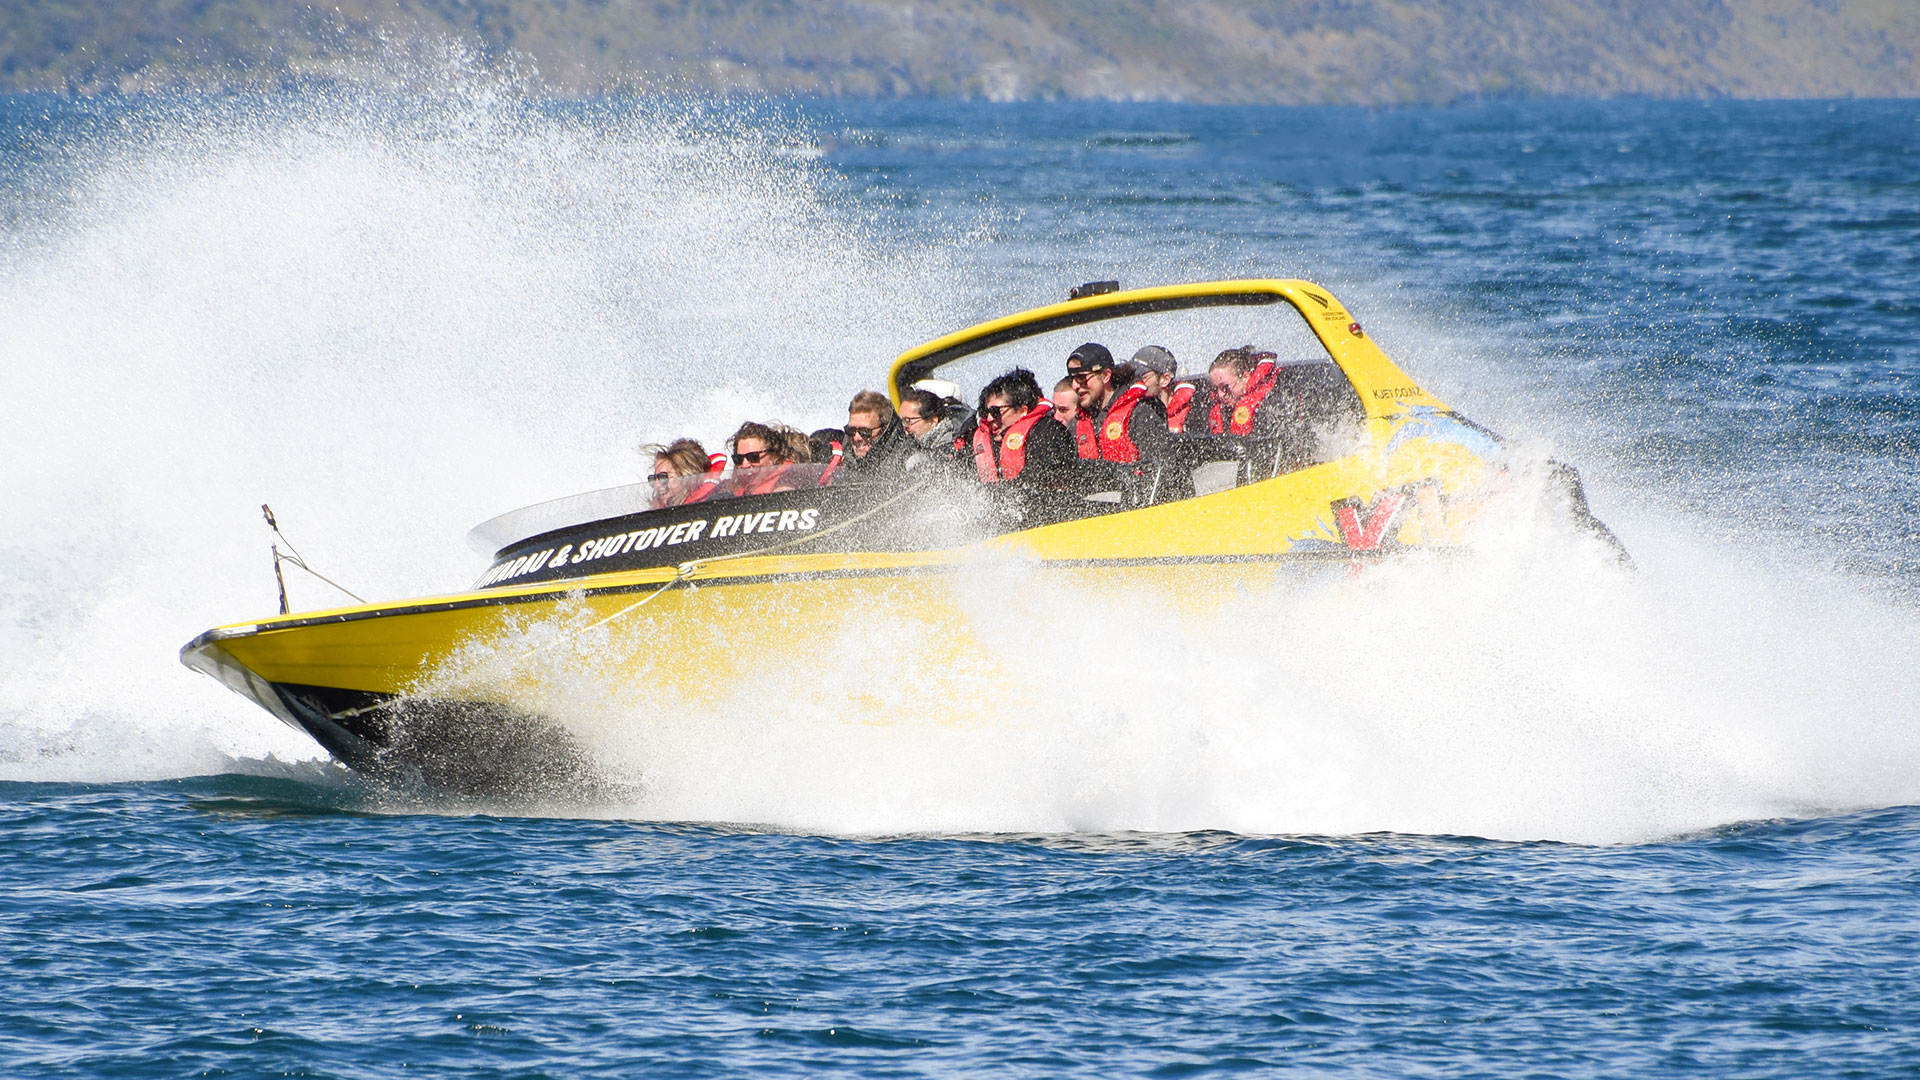 Group of people in KJet jet boat in the lake just after a 360 degree spin in Queenstown New Zealand